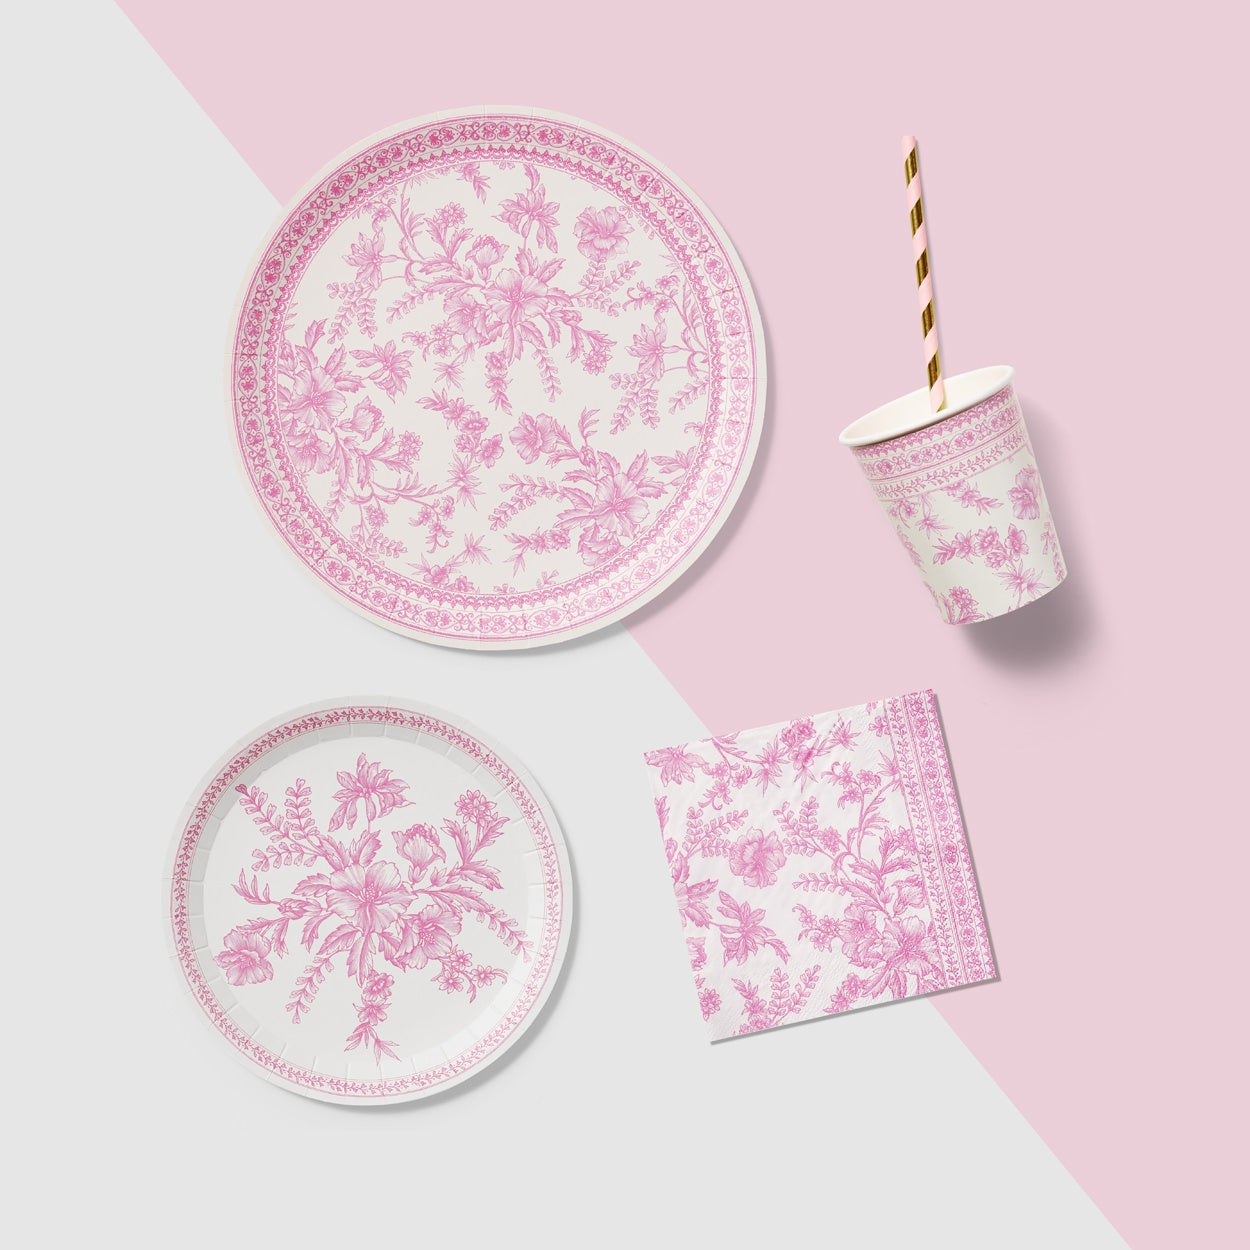 A table set with Pink French Toile Paper Party Dinnerware plates from Coterie Party Supplies featuring floral toile dinnerware patterns that evoke the charm of the French countryside, complemented by silverware.